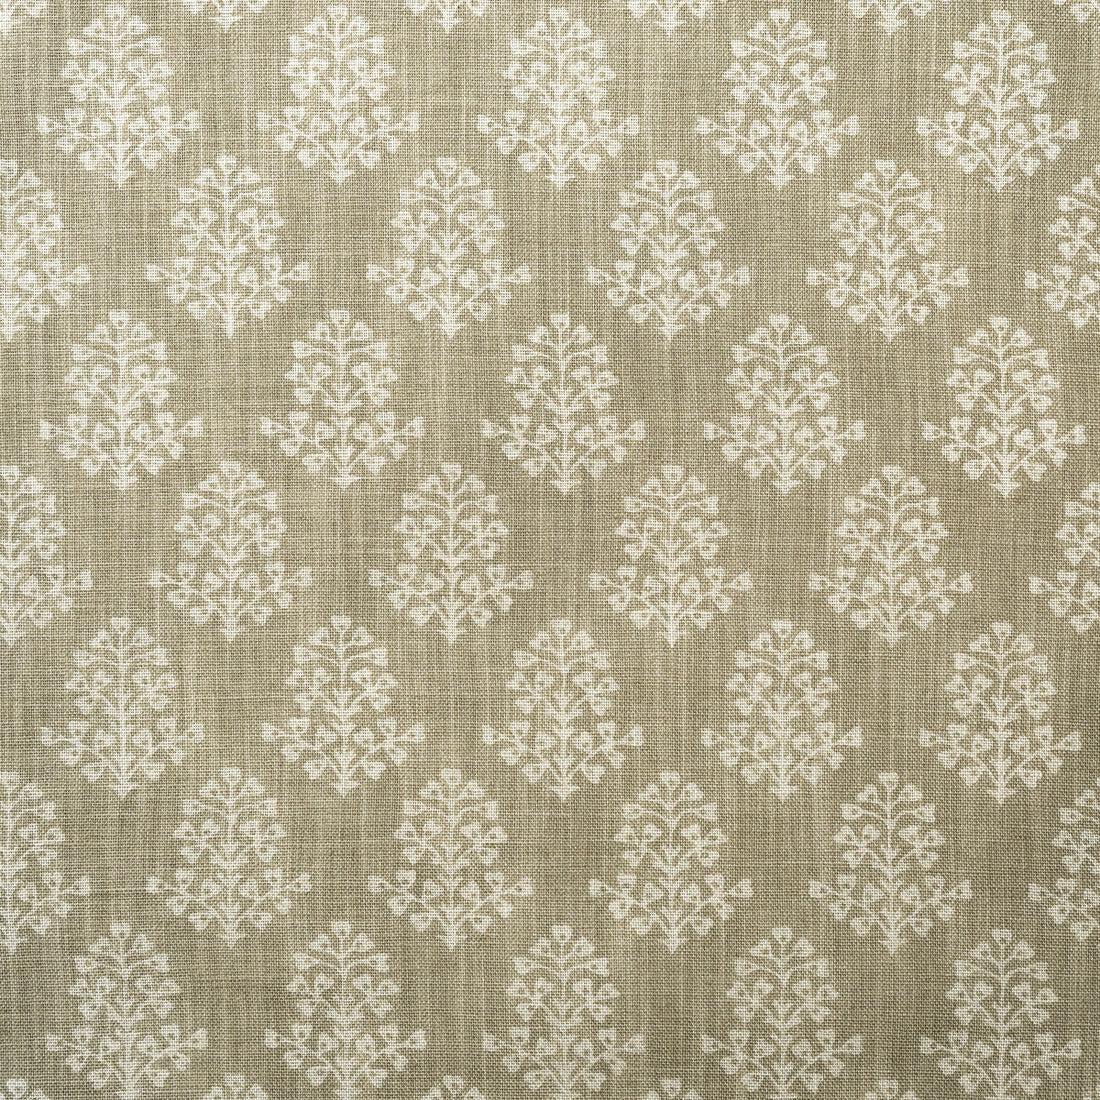 Sprig fabric in stone color - pattern AM100384.106.0 - by Kravet Couture in the Andrew Martin Garden Path collection